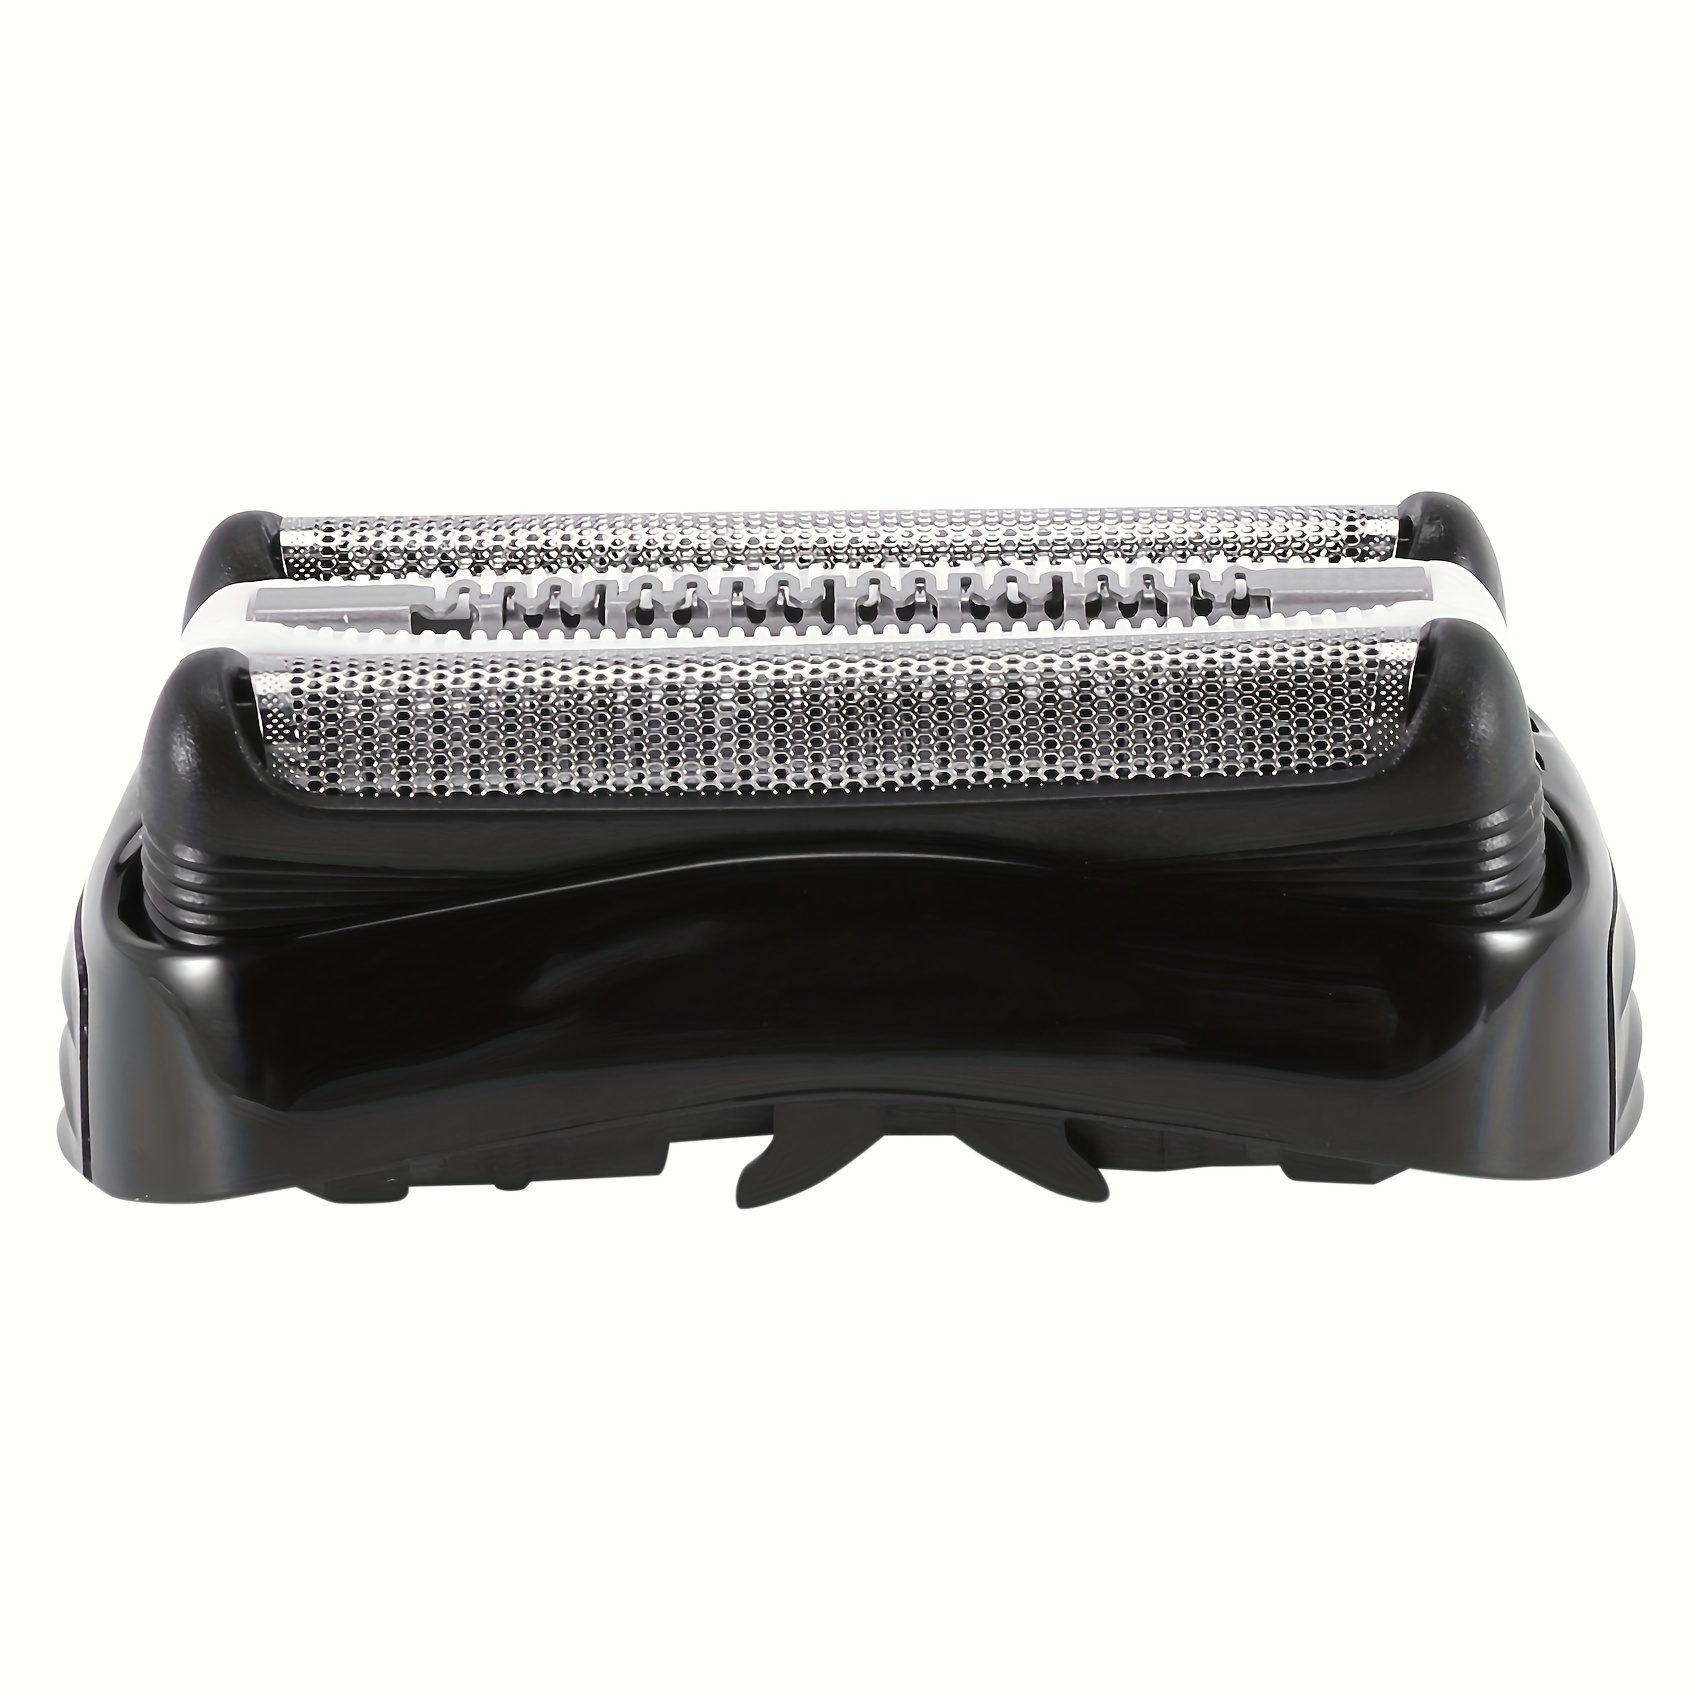 30B,310,330,340 Shaver Head Cassette Replacement for Braun Old model:  7630,7640,7650,7664,7680,7690,7763,7765,7783,7785,7790,5746